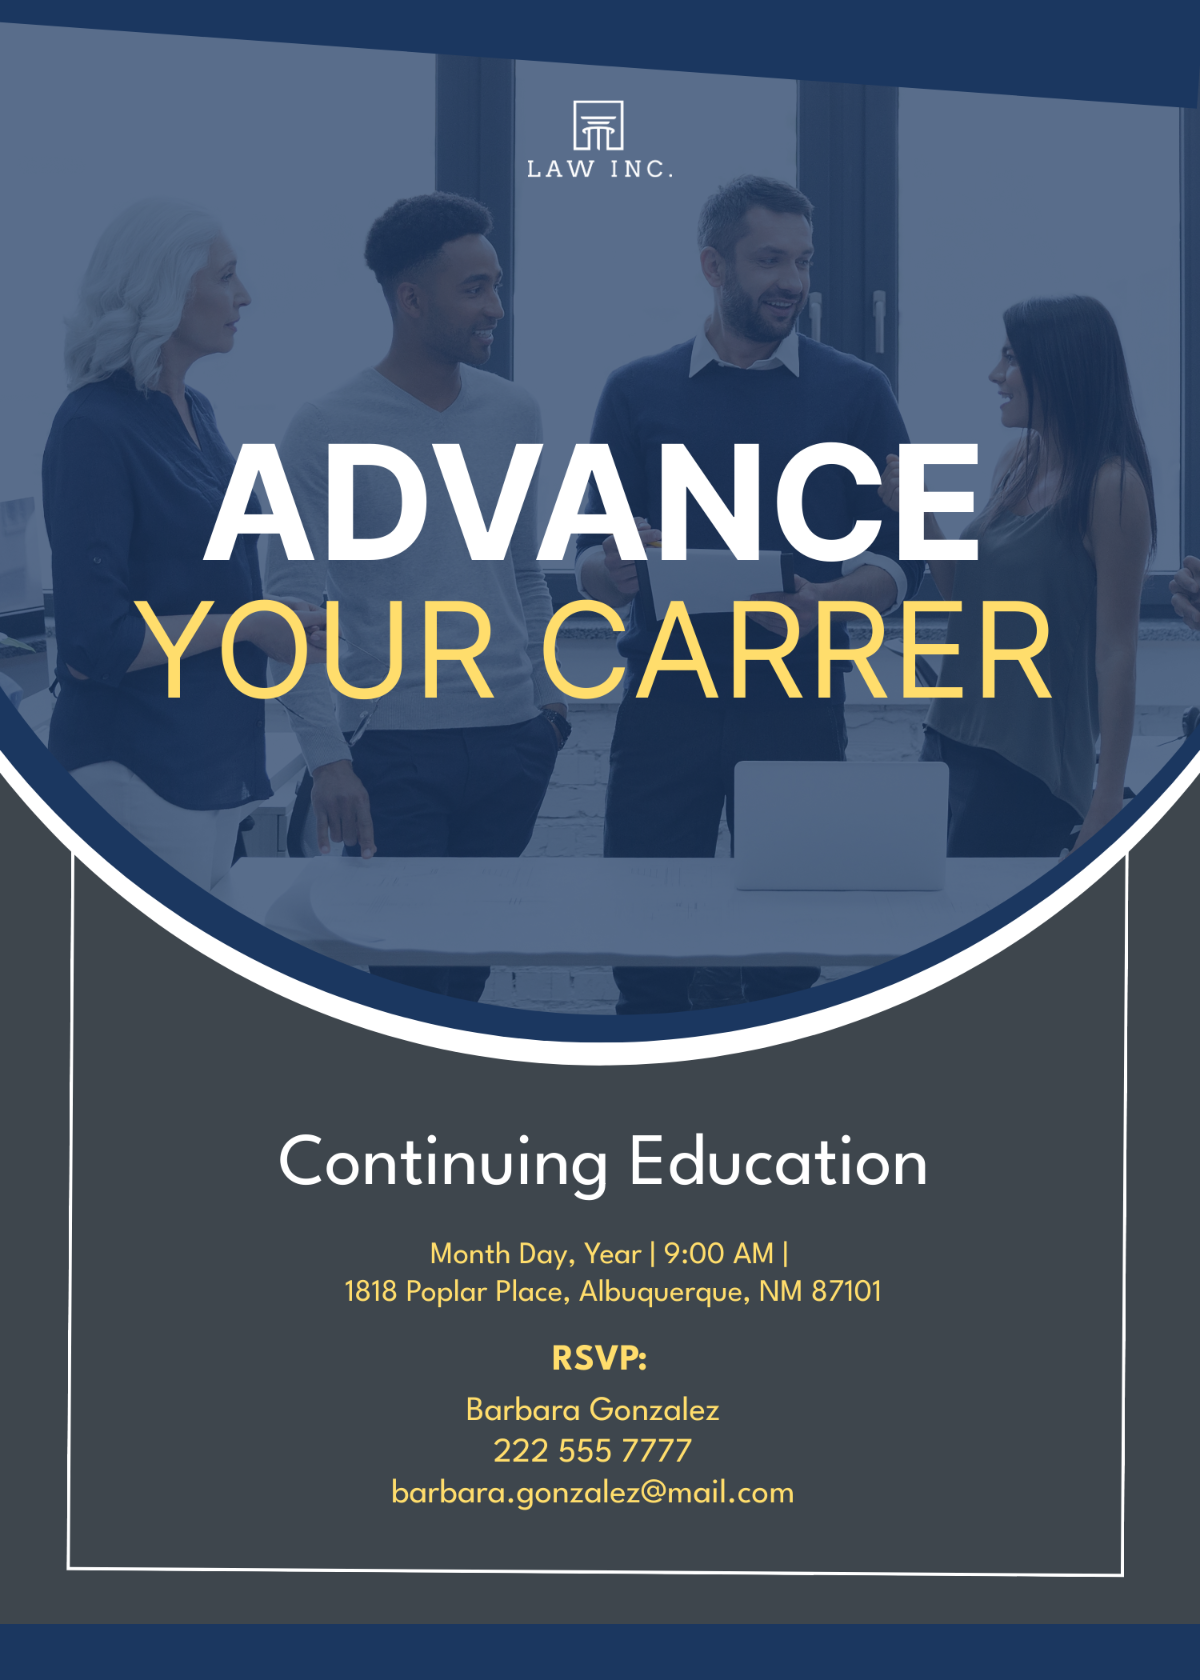 Law Firm Continuing Education Invitation